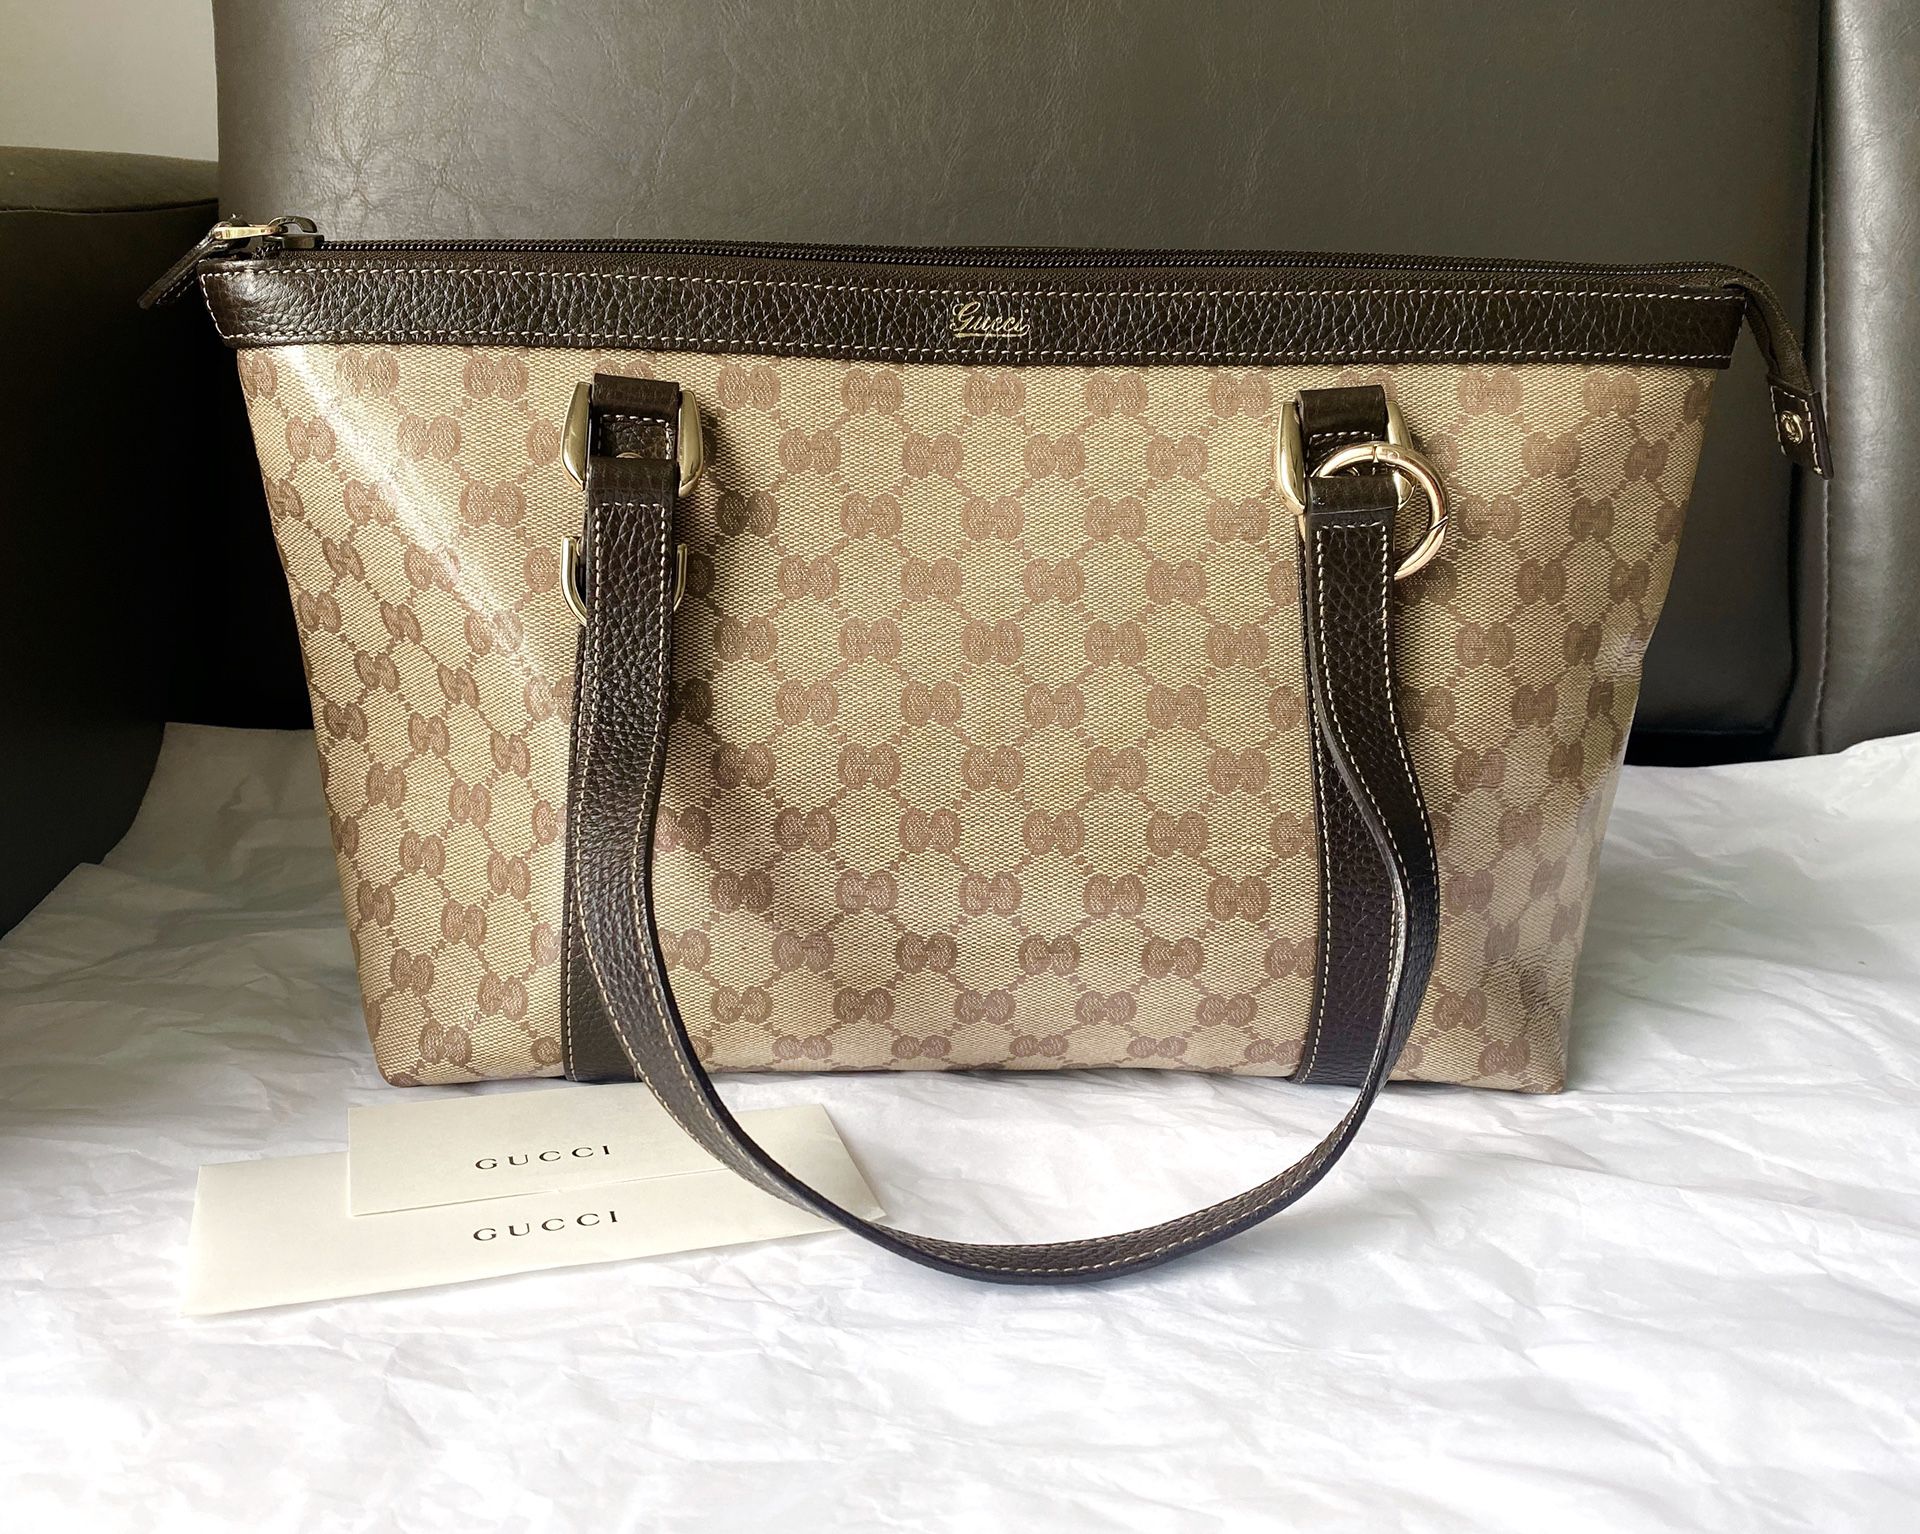 Authentic Gucci Tote bag, leather& coated canvas